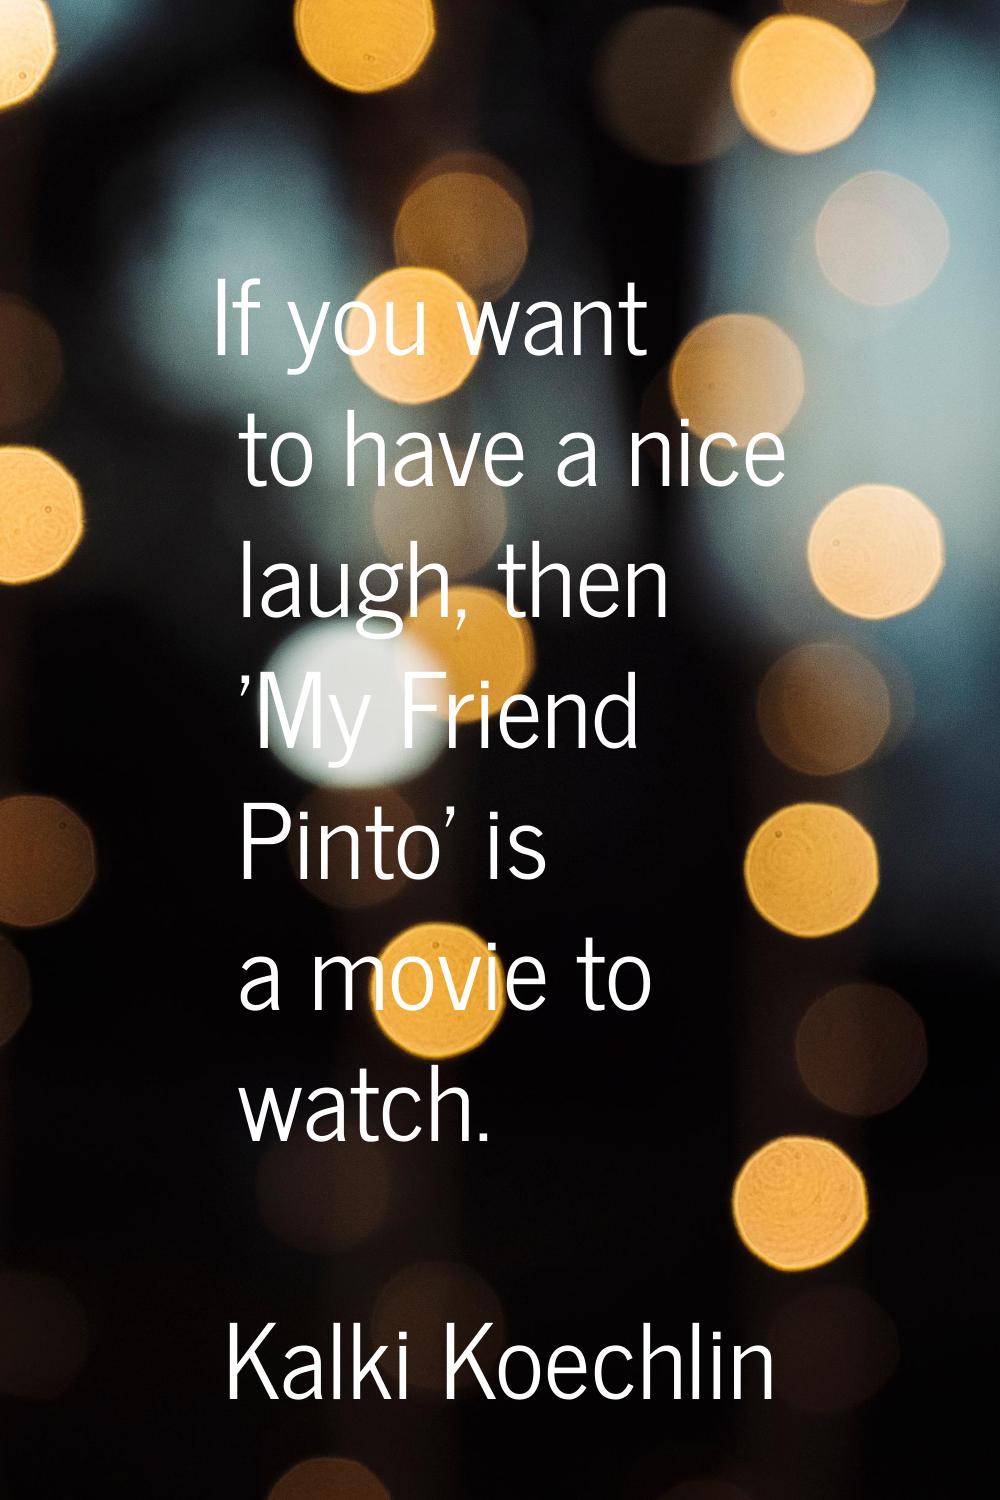 If you want to have a nice laugh, then 'My Friend Pinto' is a movie to watch.